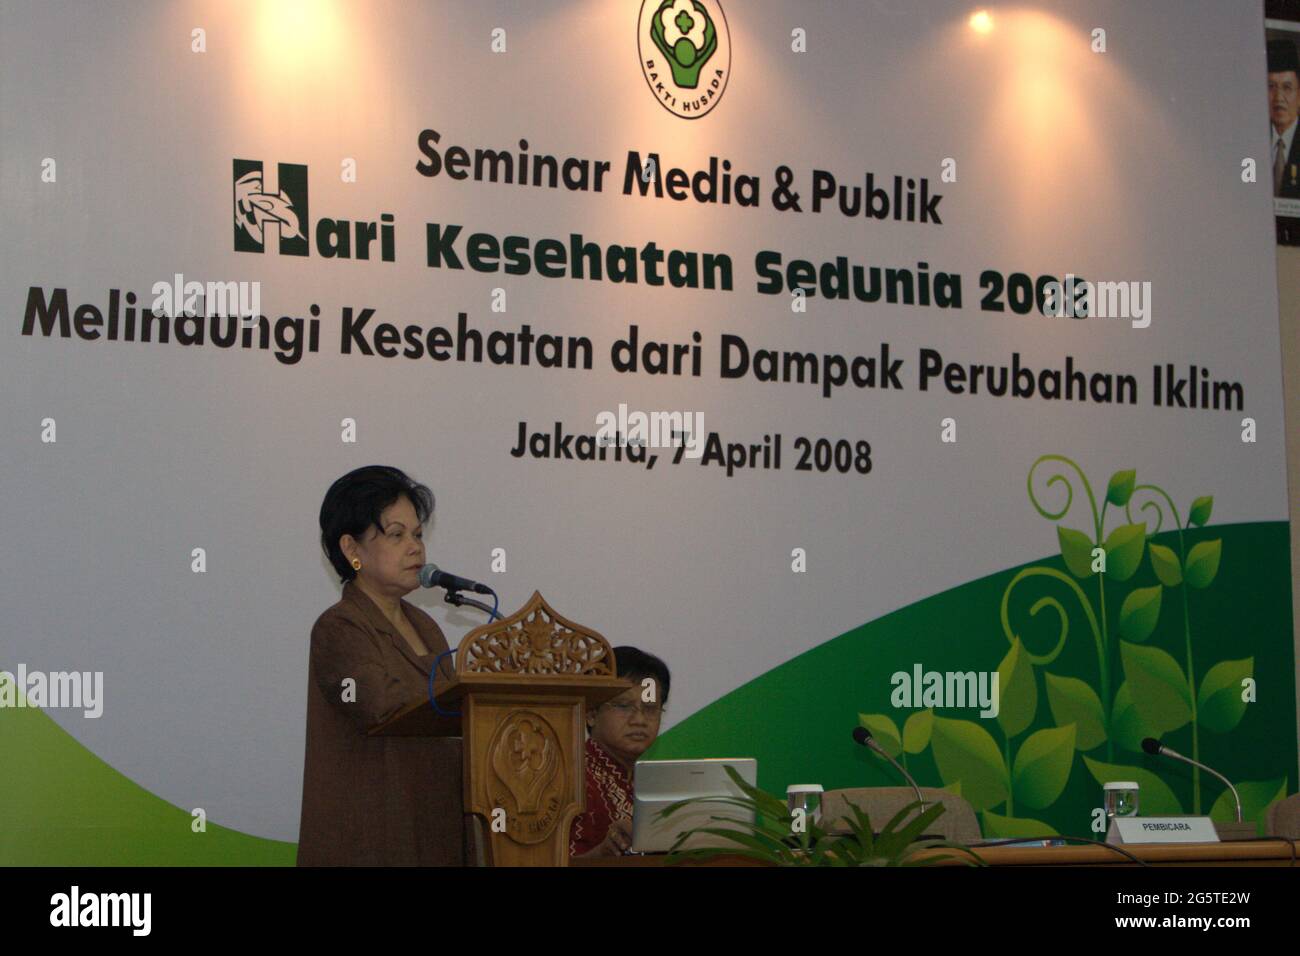 Jakarta, Indonesia. 7th April 2008. The United Nation's Millenium Development Goals (MDG) Special Ambassador for Indonesia, Dr. Erna Witoelar gives a speech entitled 'Raising public awareness and understanding on impact of climate change' during a media and public seminar held in Leimena Room at the Indonesian Ministry of Health office building complex. The seminar is a part of a series of event celebrating the 2008 World Health Day in Jakarta, Indonesia. The theme for the 2008 celebration is 'protecting health from climate change'. Stock Photo